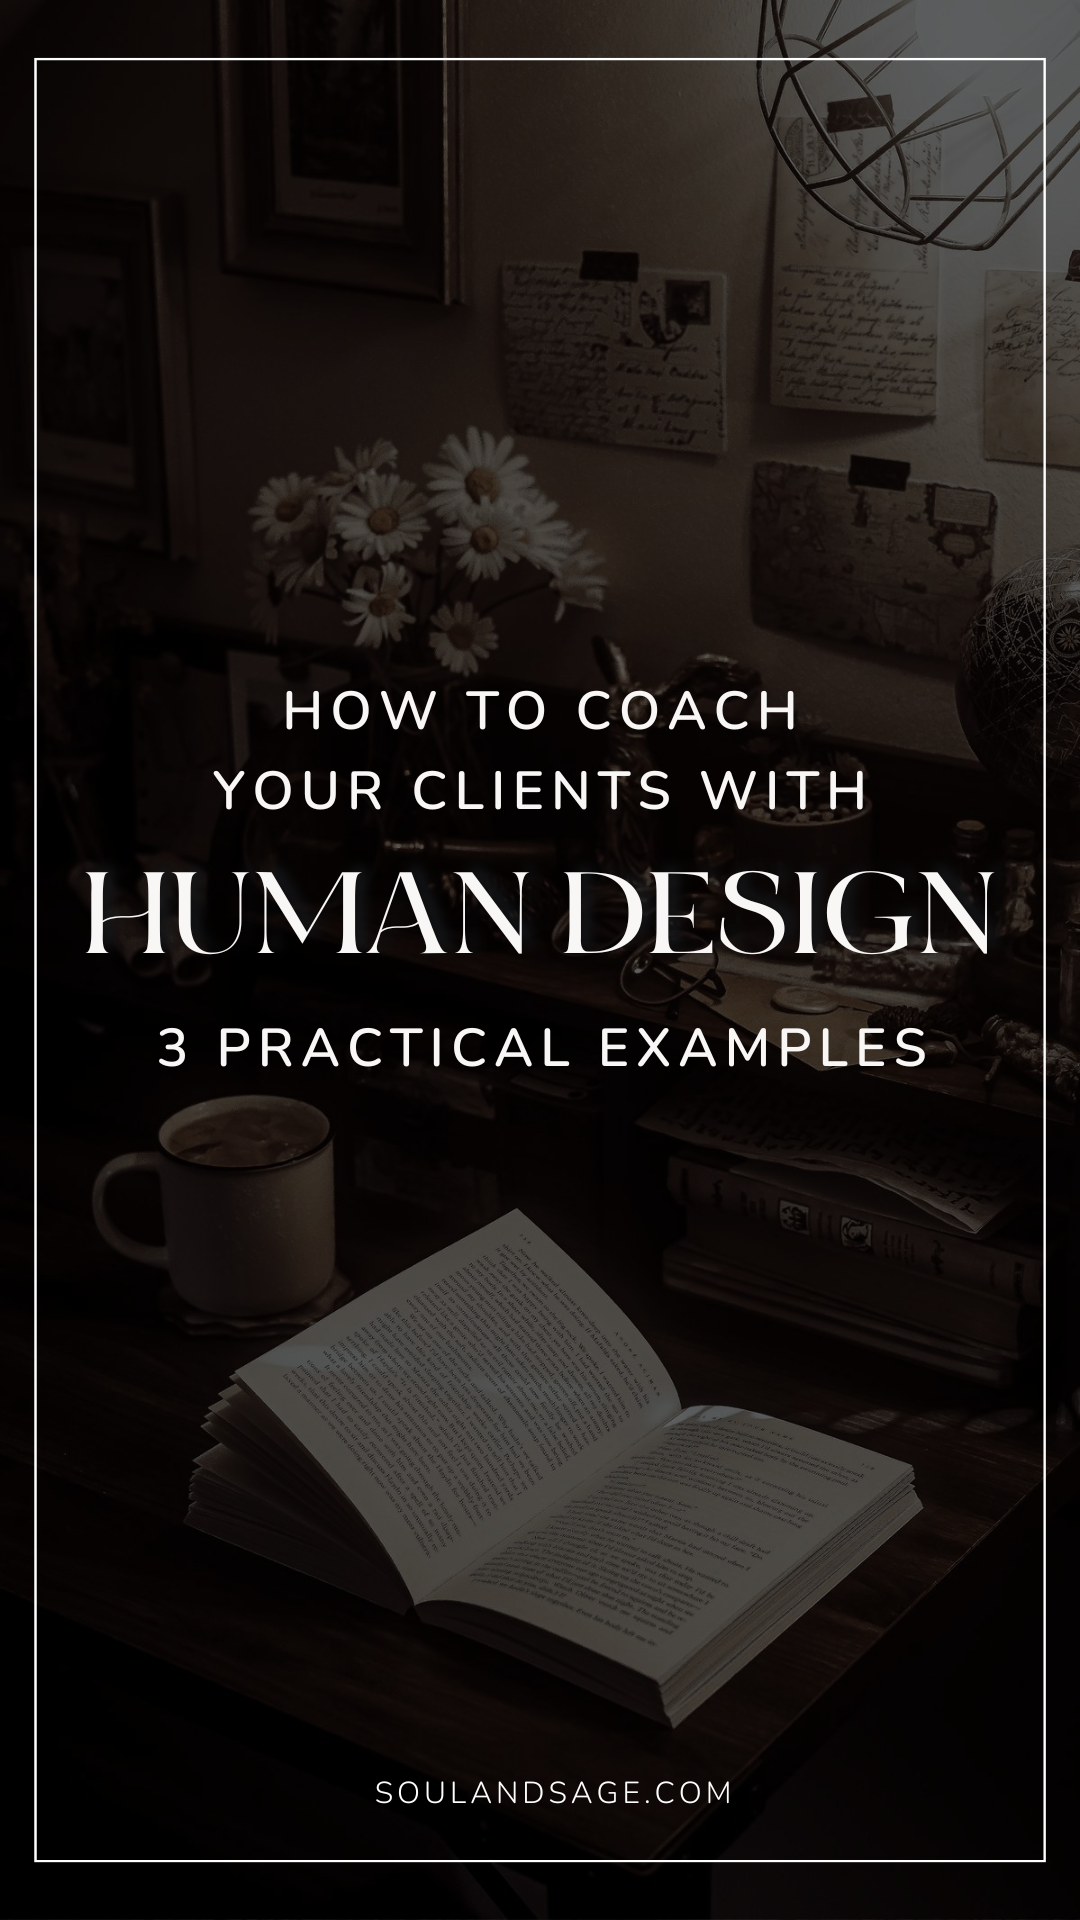 How to coach your clients with human design 3 practical examples